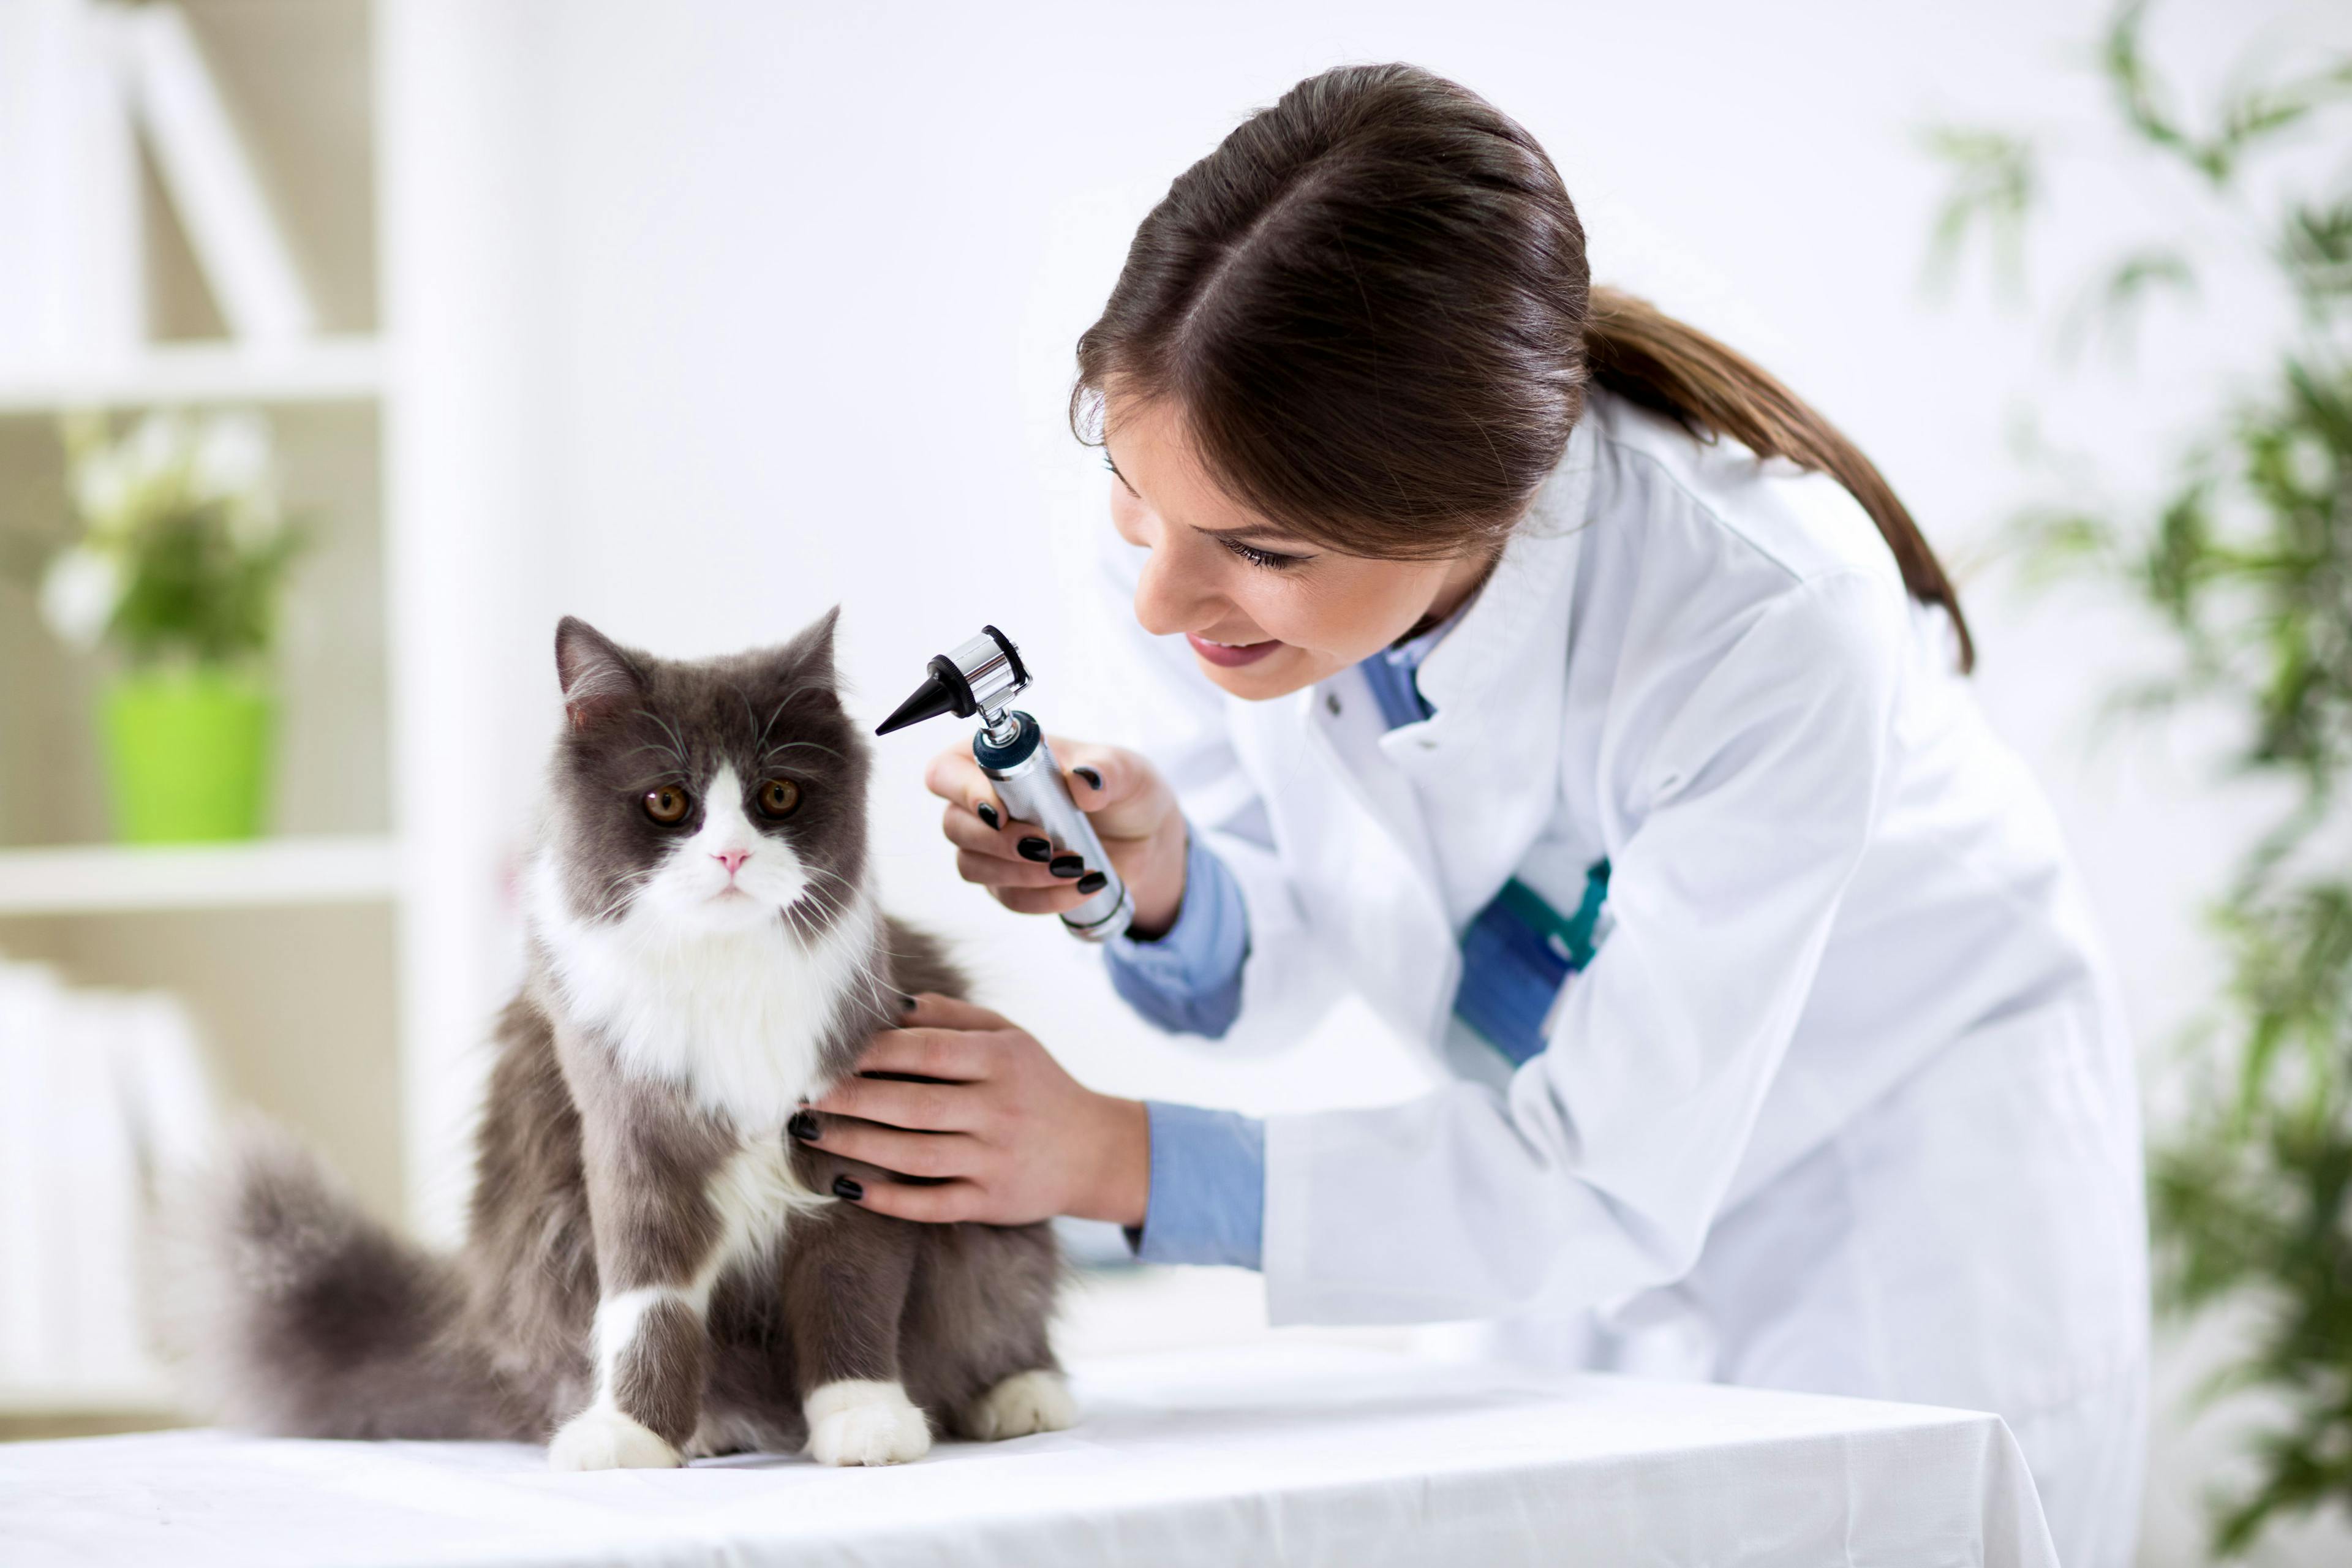 BluePearl reports link increased veterinary visits to COVID-19 